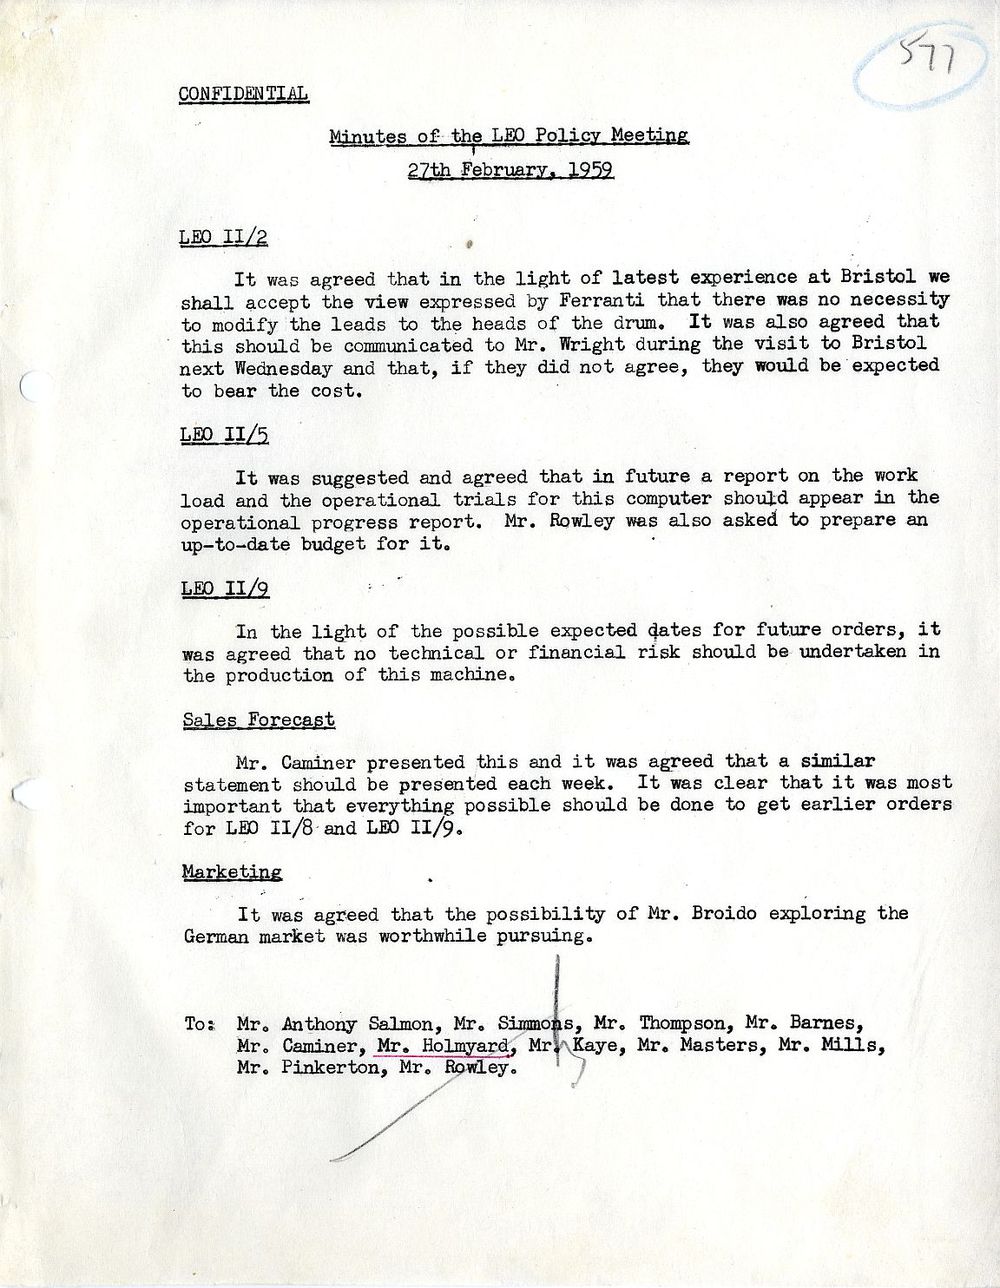 Article: 54578 LEO Policy Meeting, 27/2/1959